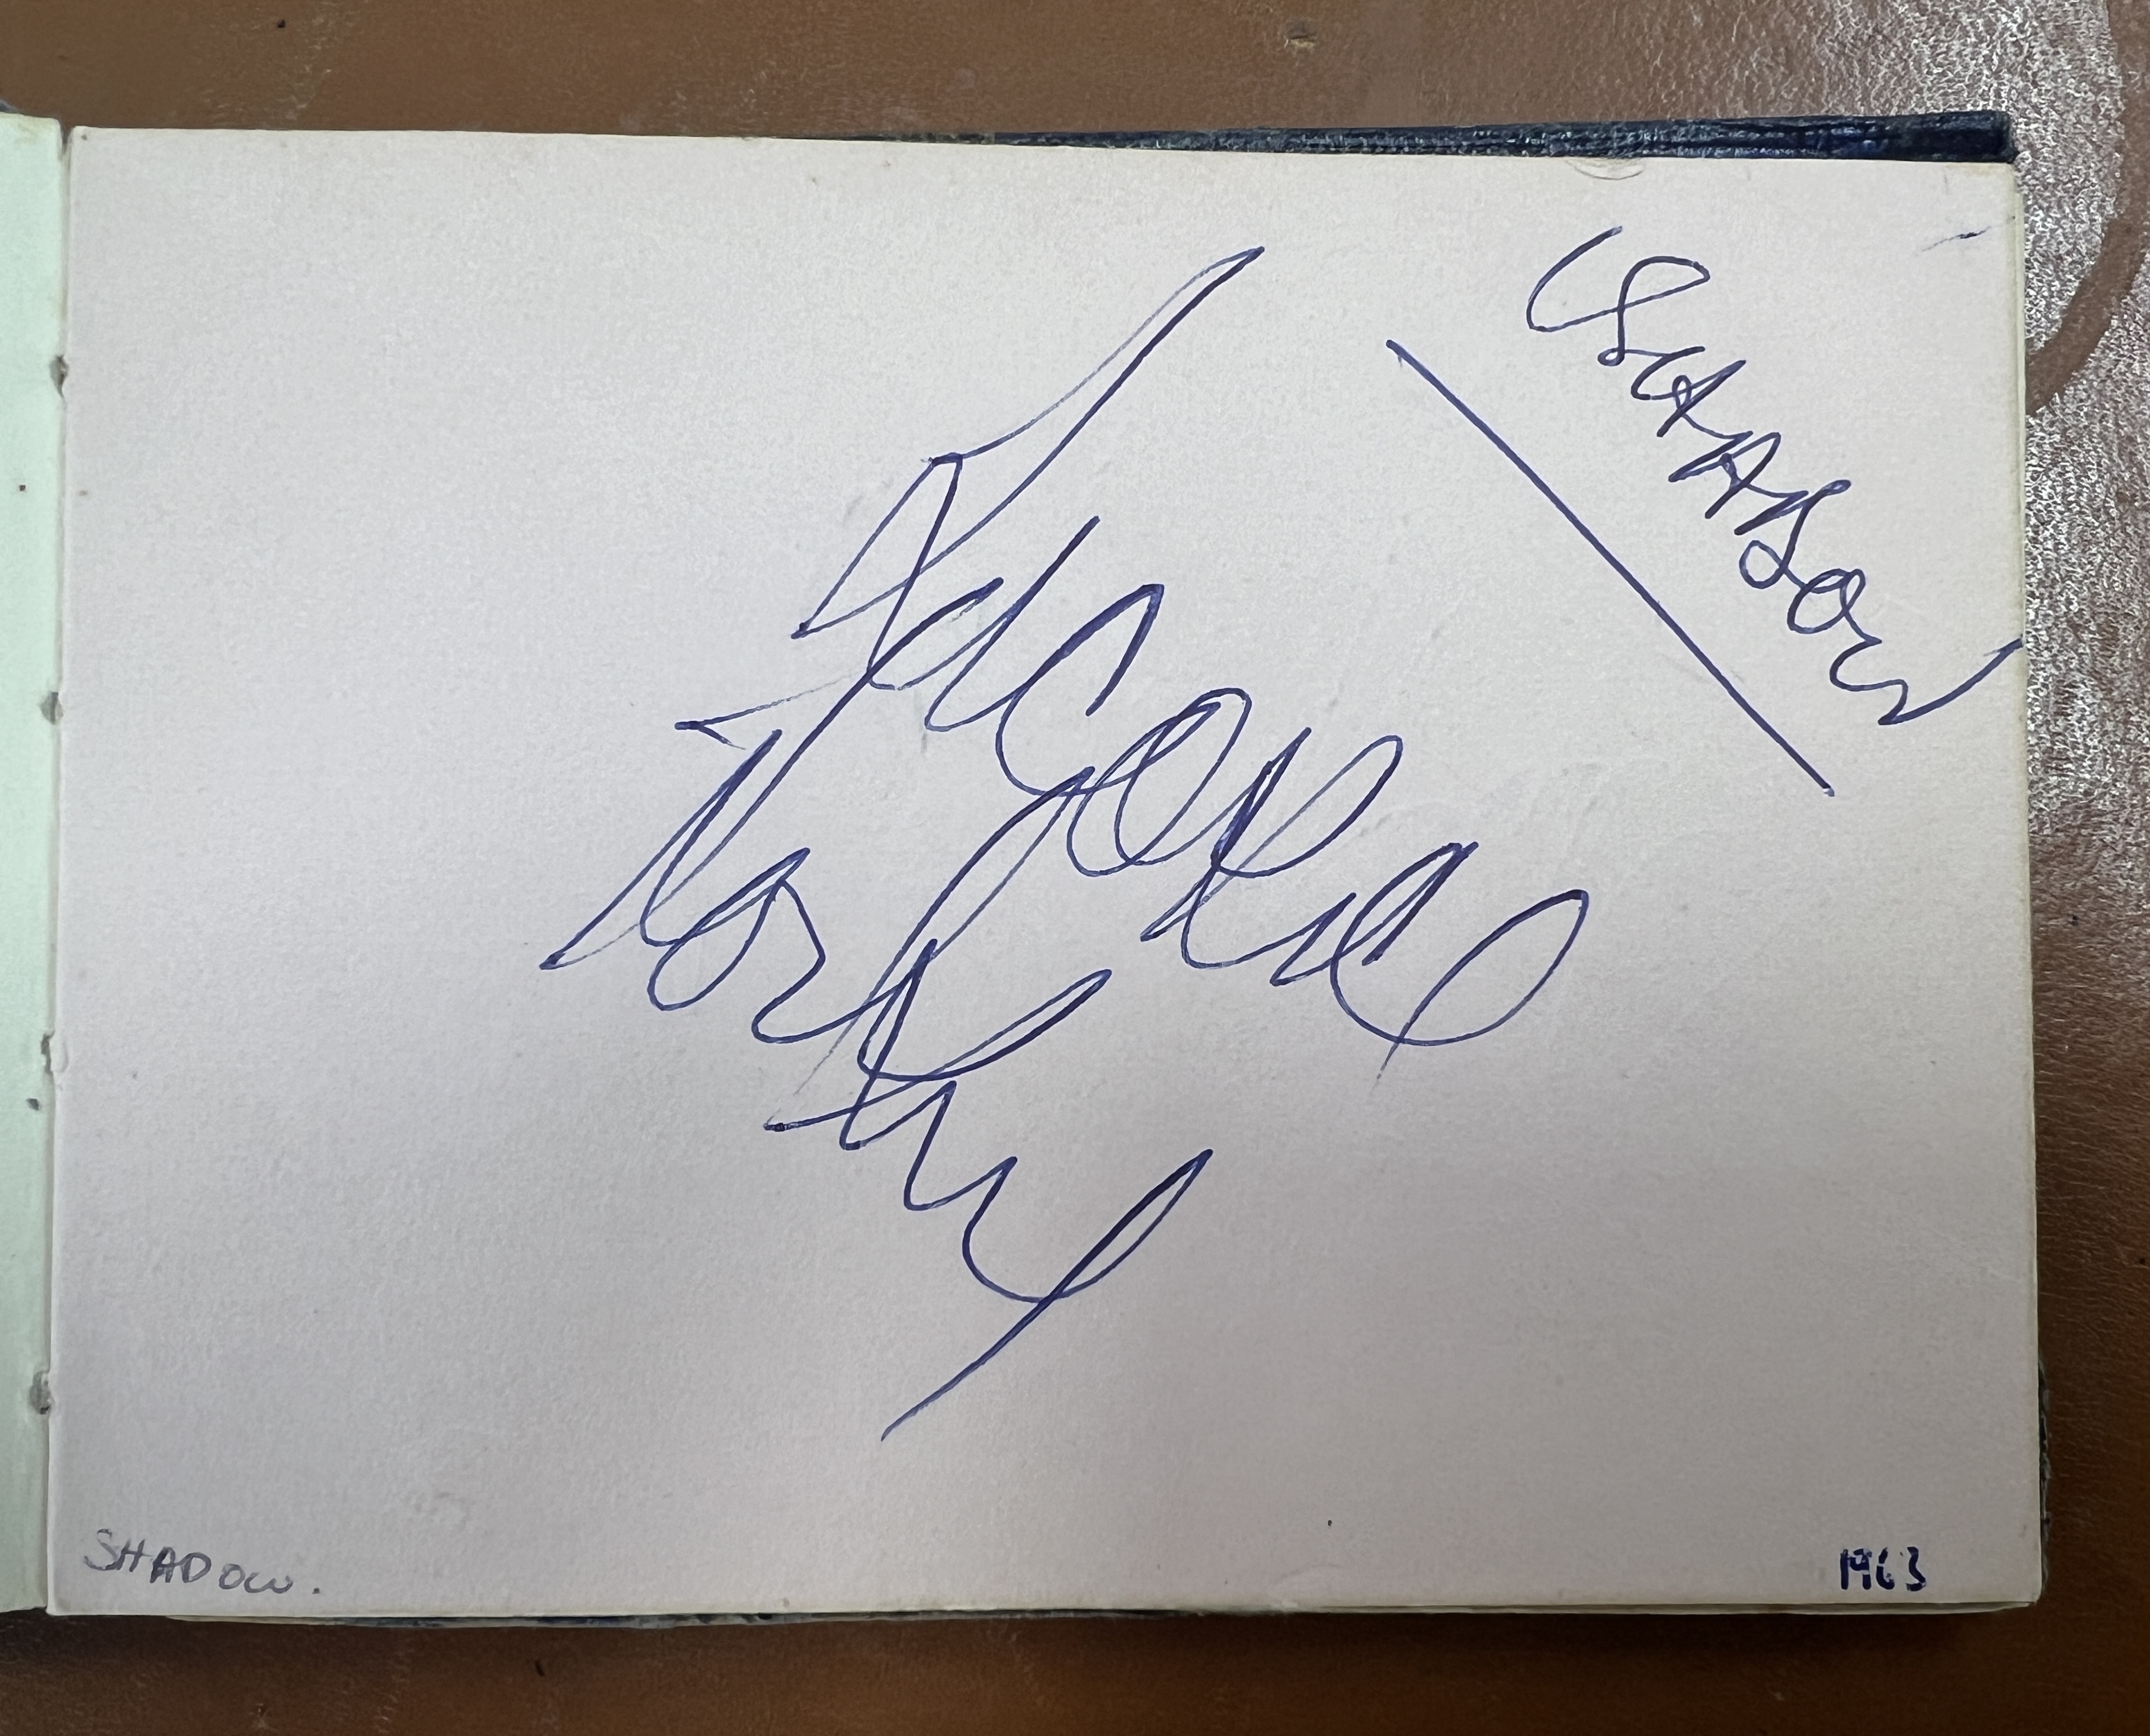 A 1960's autograph album containing autographs of various celebrities including Cliff Richard - Image 14 of 37